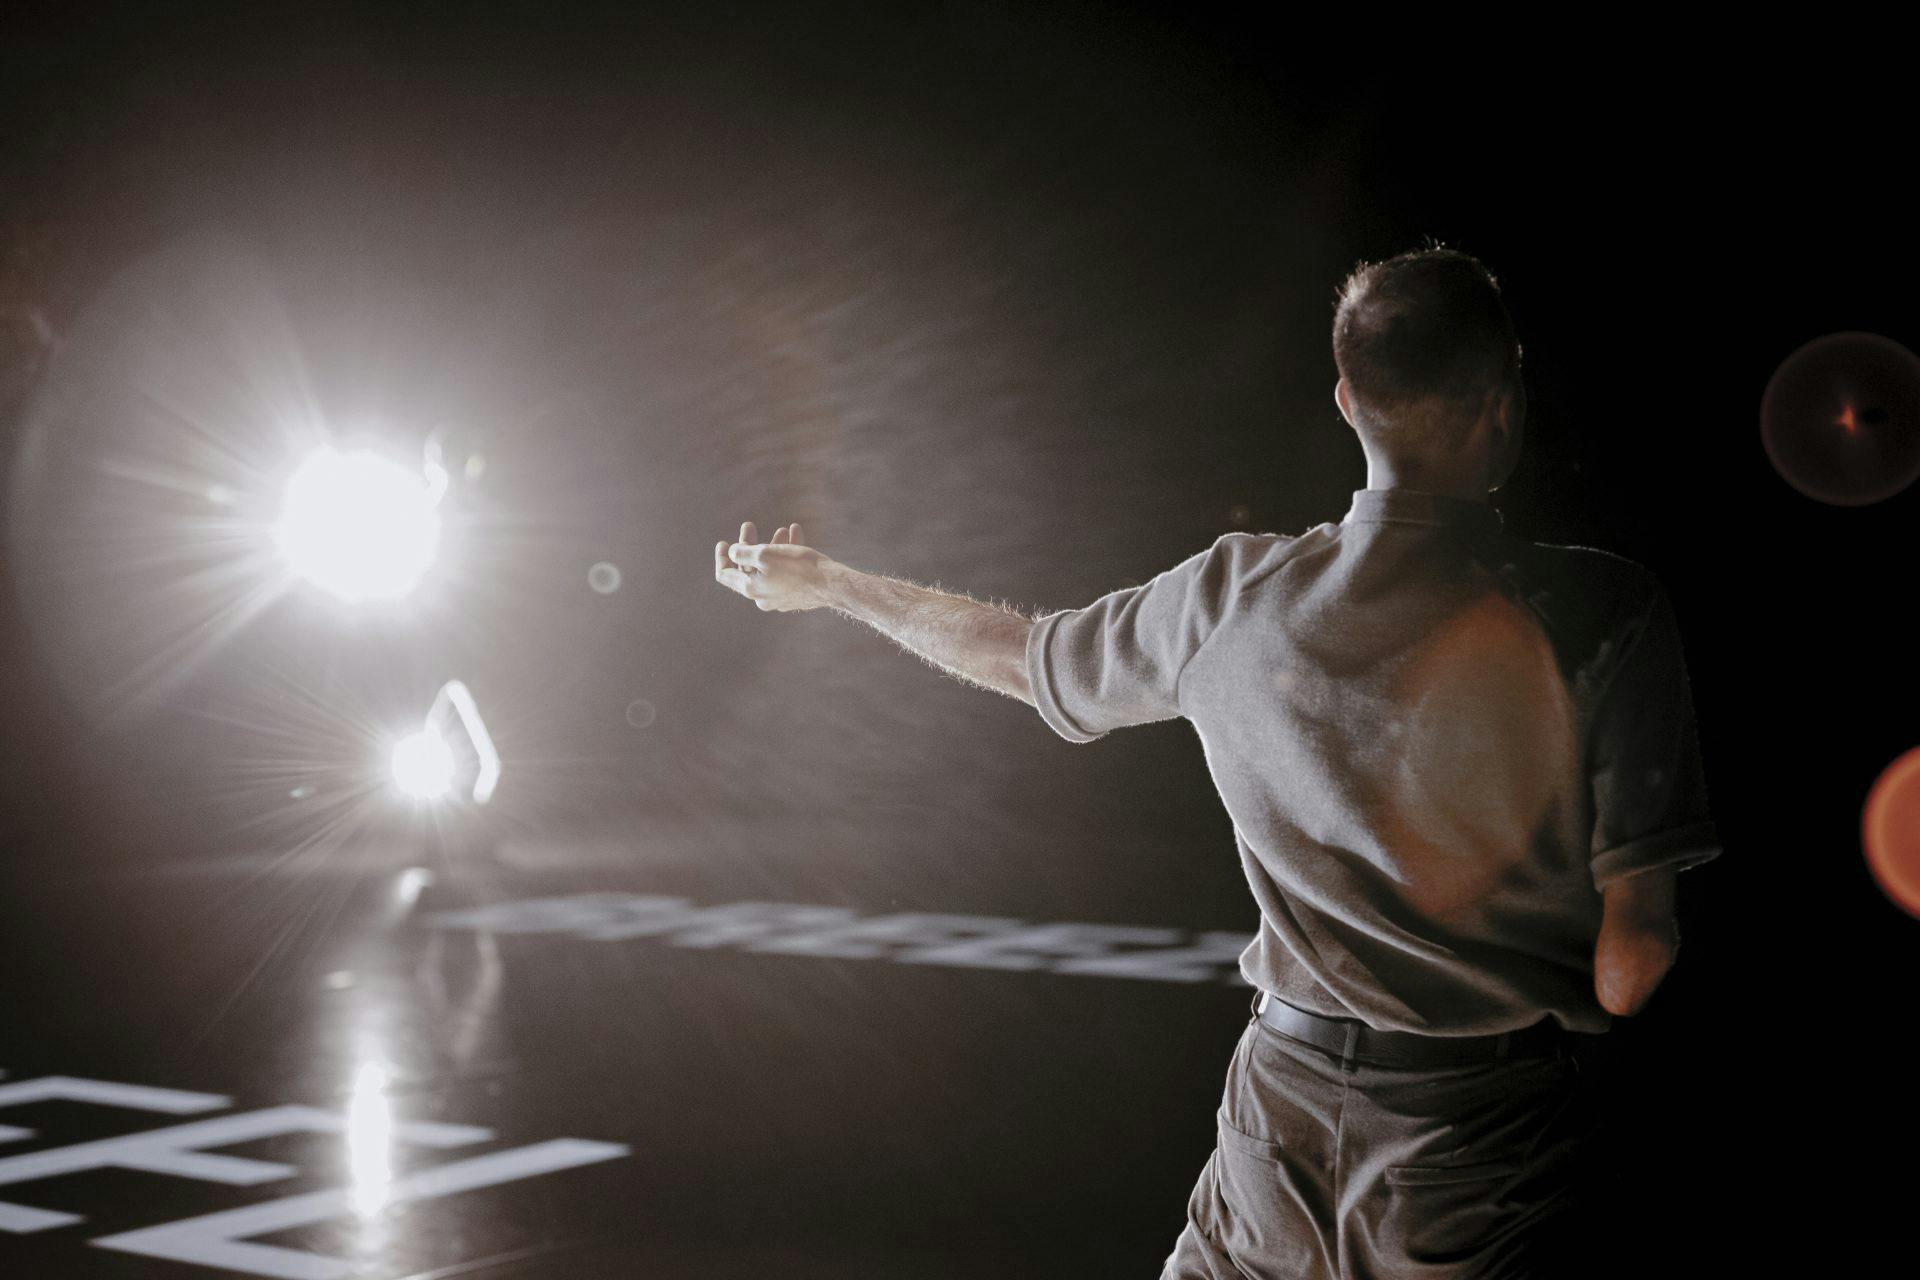 On the stage, from behind, a dancer without a forearm. He is illuminated by a spotlight turned towards the camera.